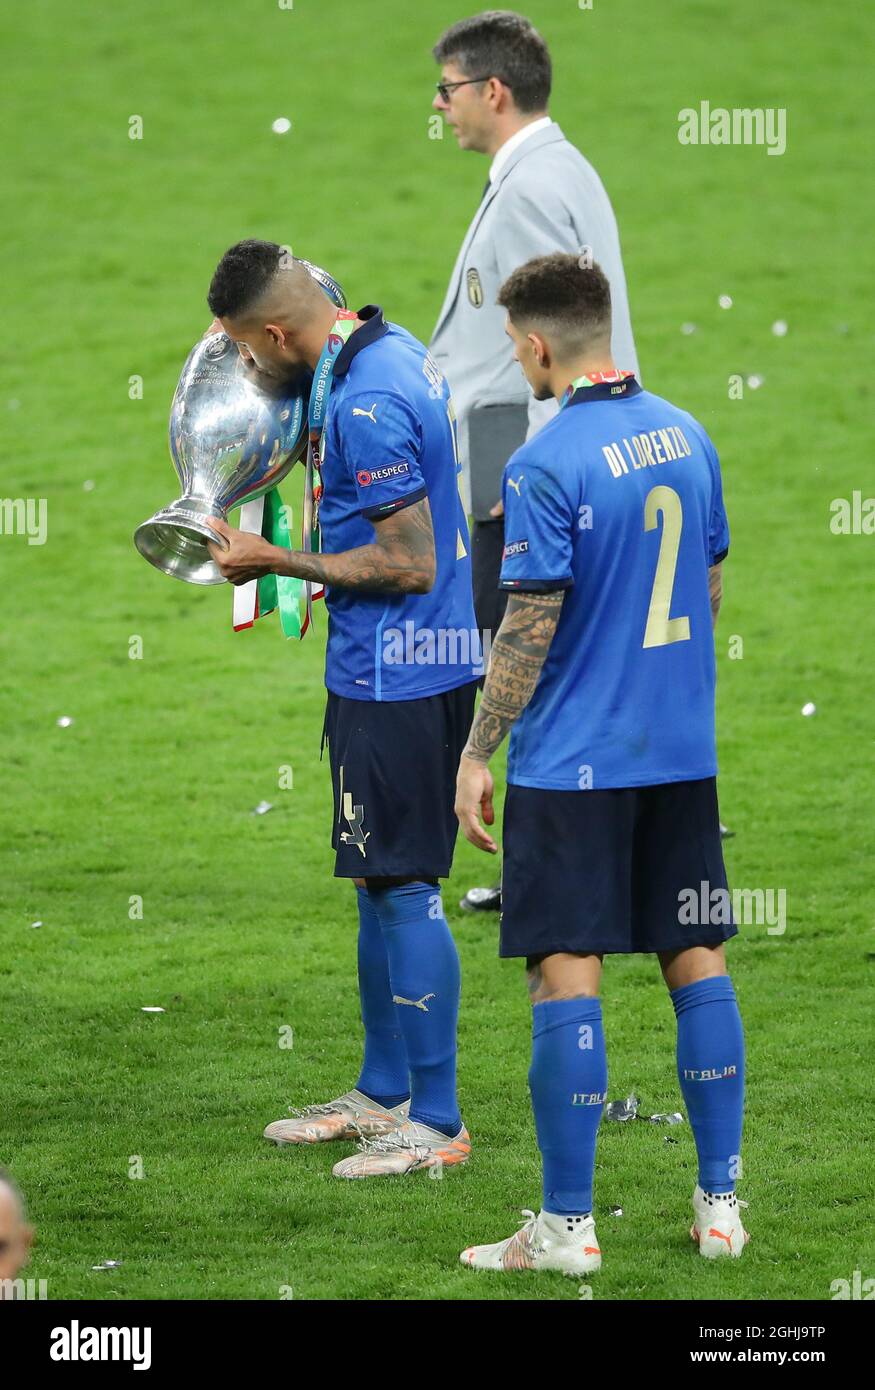 London, England, 11th July 2021. Emerson of Italy kisses the trophy during the UEFA Euro 2020 final at Wembley Stadium, London. Picture credit should read: David Klein / Sportimage via PA Images Stock Photo